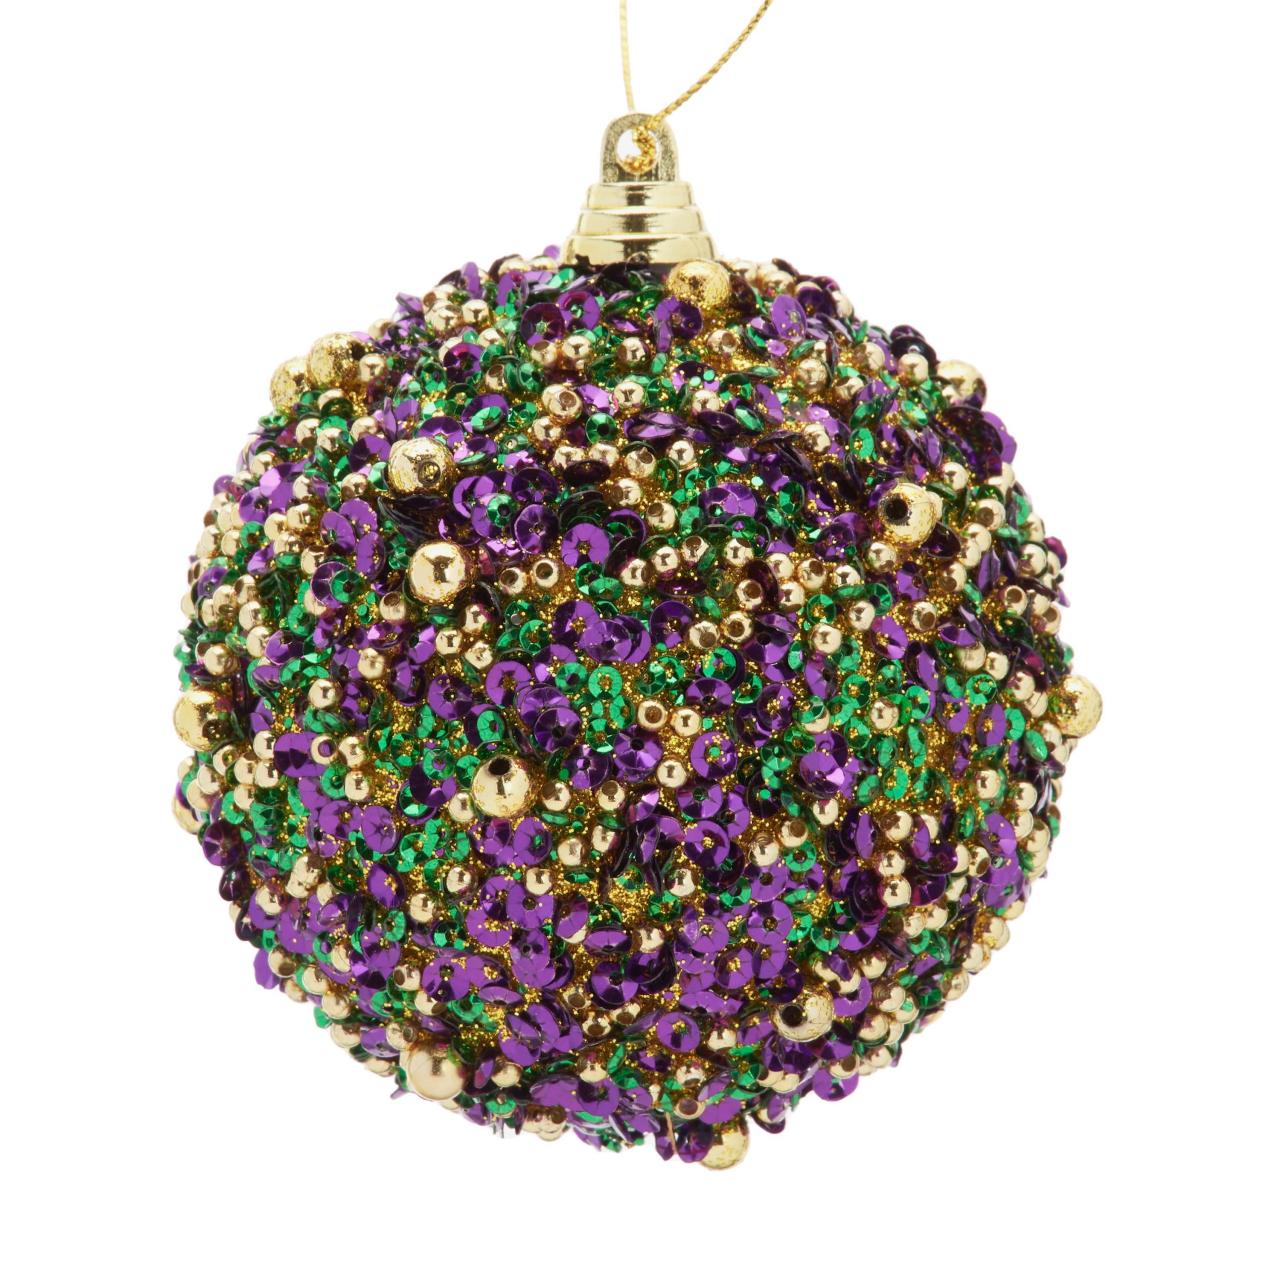 Set Of 2! Mardi Gras Purple, Green, Gold Bedazzled Beads & Sequins Ornaments Round Orleans Holiday Christmas Ornaments